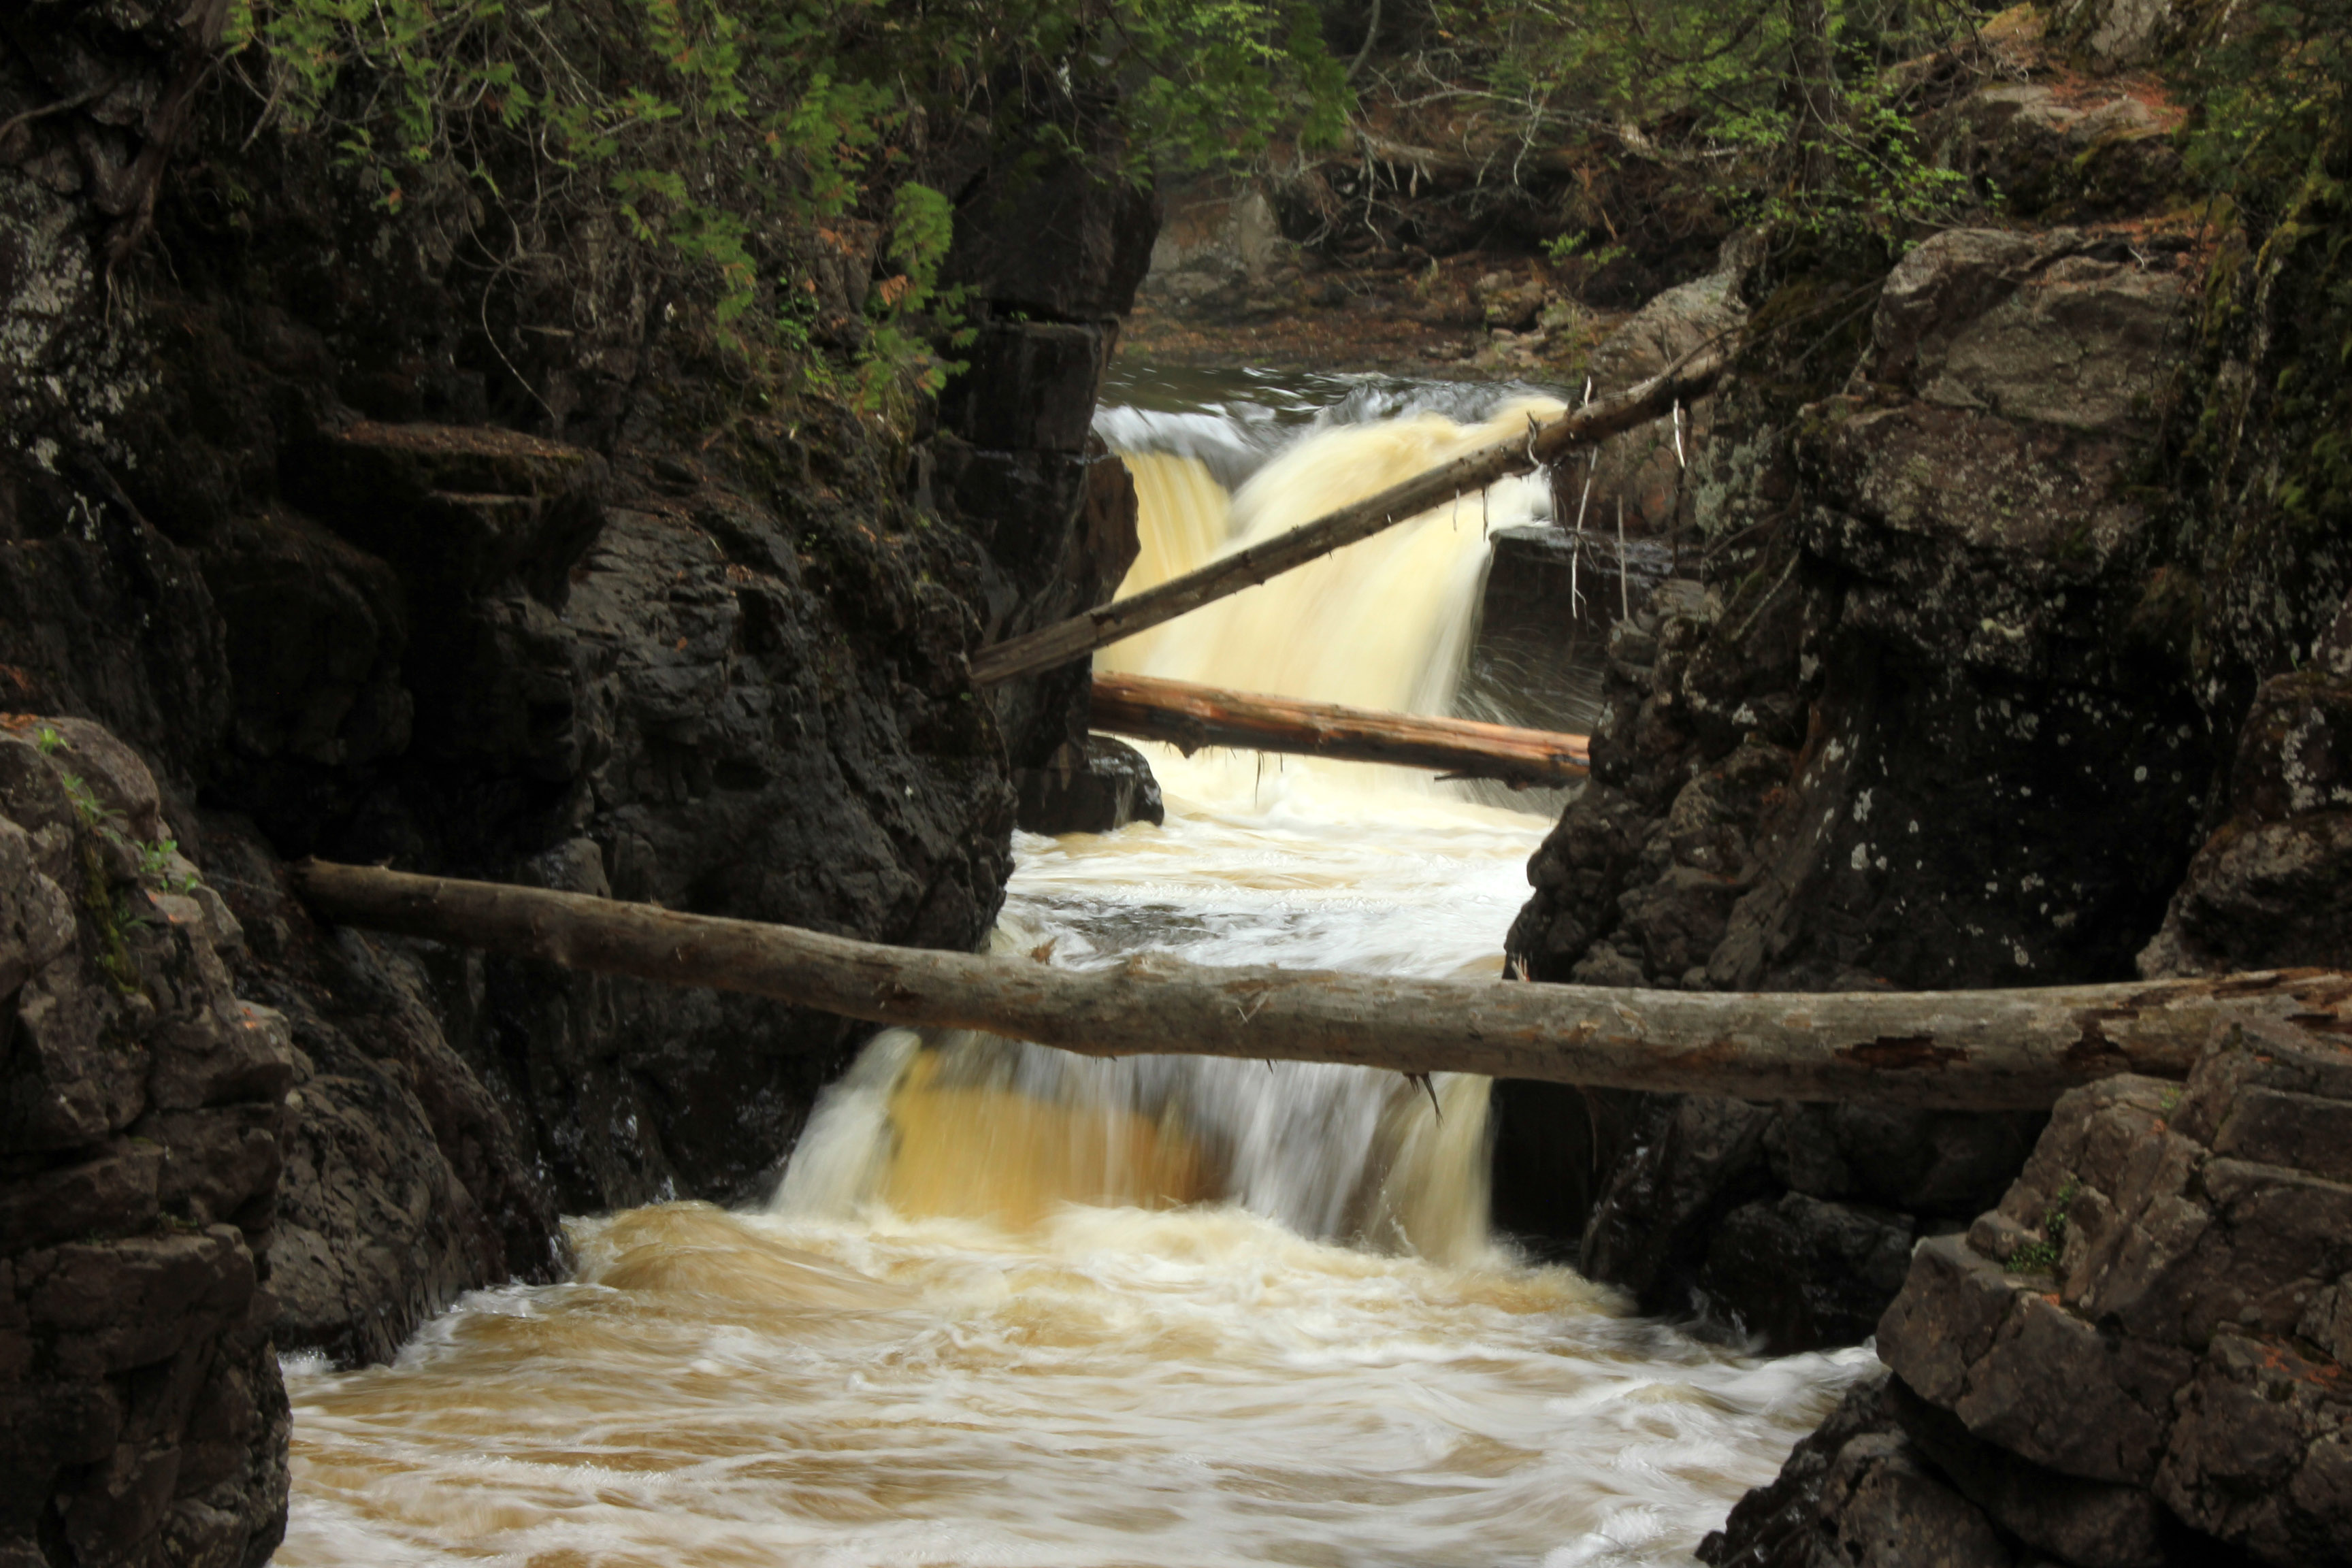 Logs Across The River At Cascade River State Park Minnesota Image